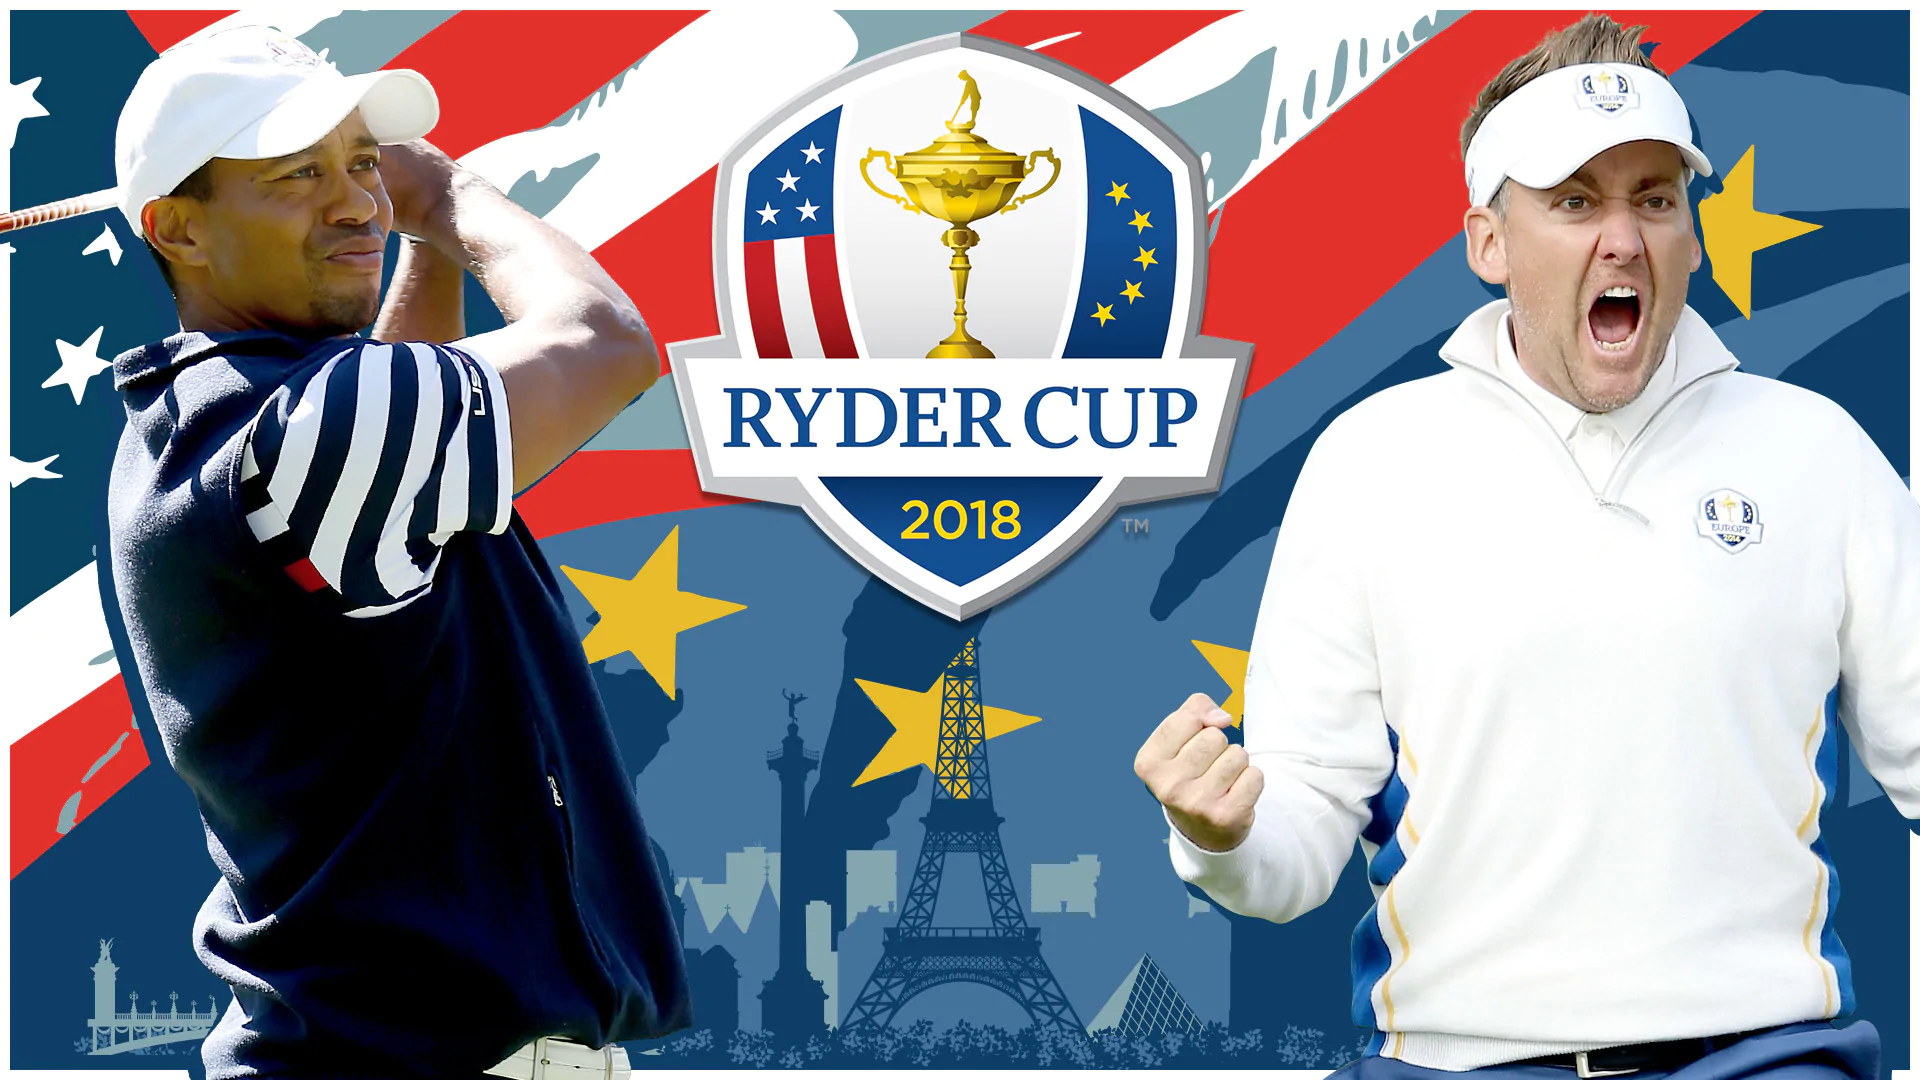 How to watch the Ryder Cup on TV and online